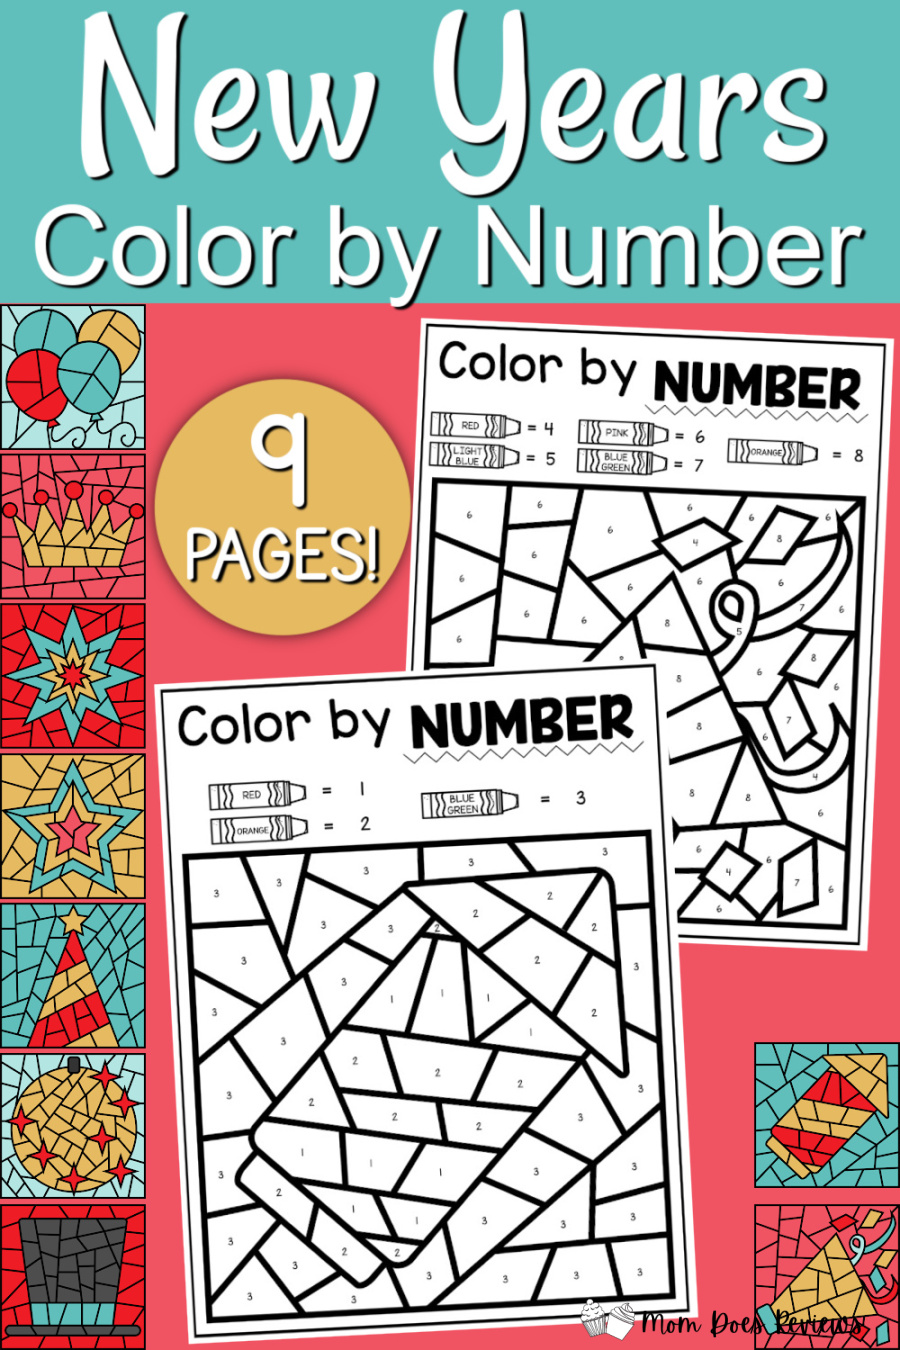 New Year's Color-by-Number Printable Pages!